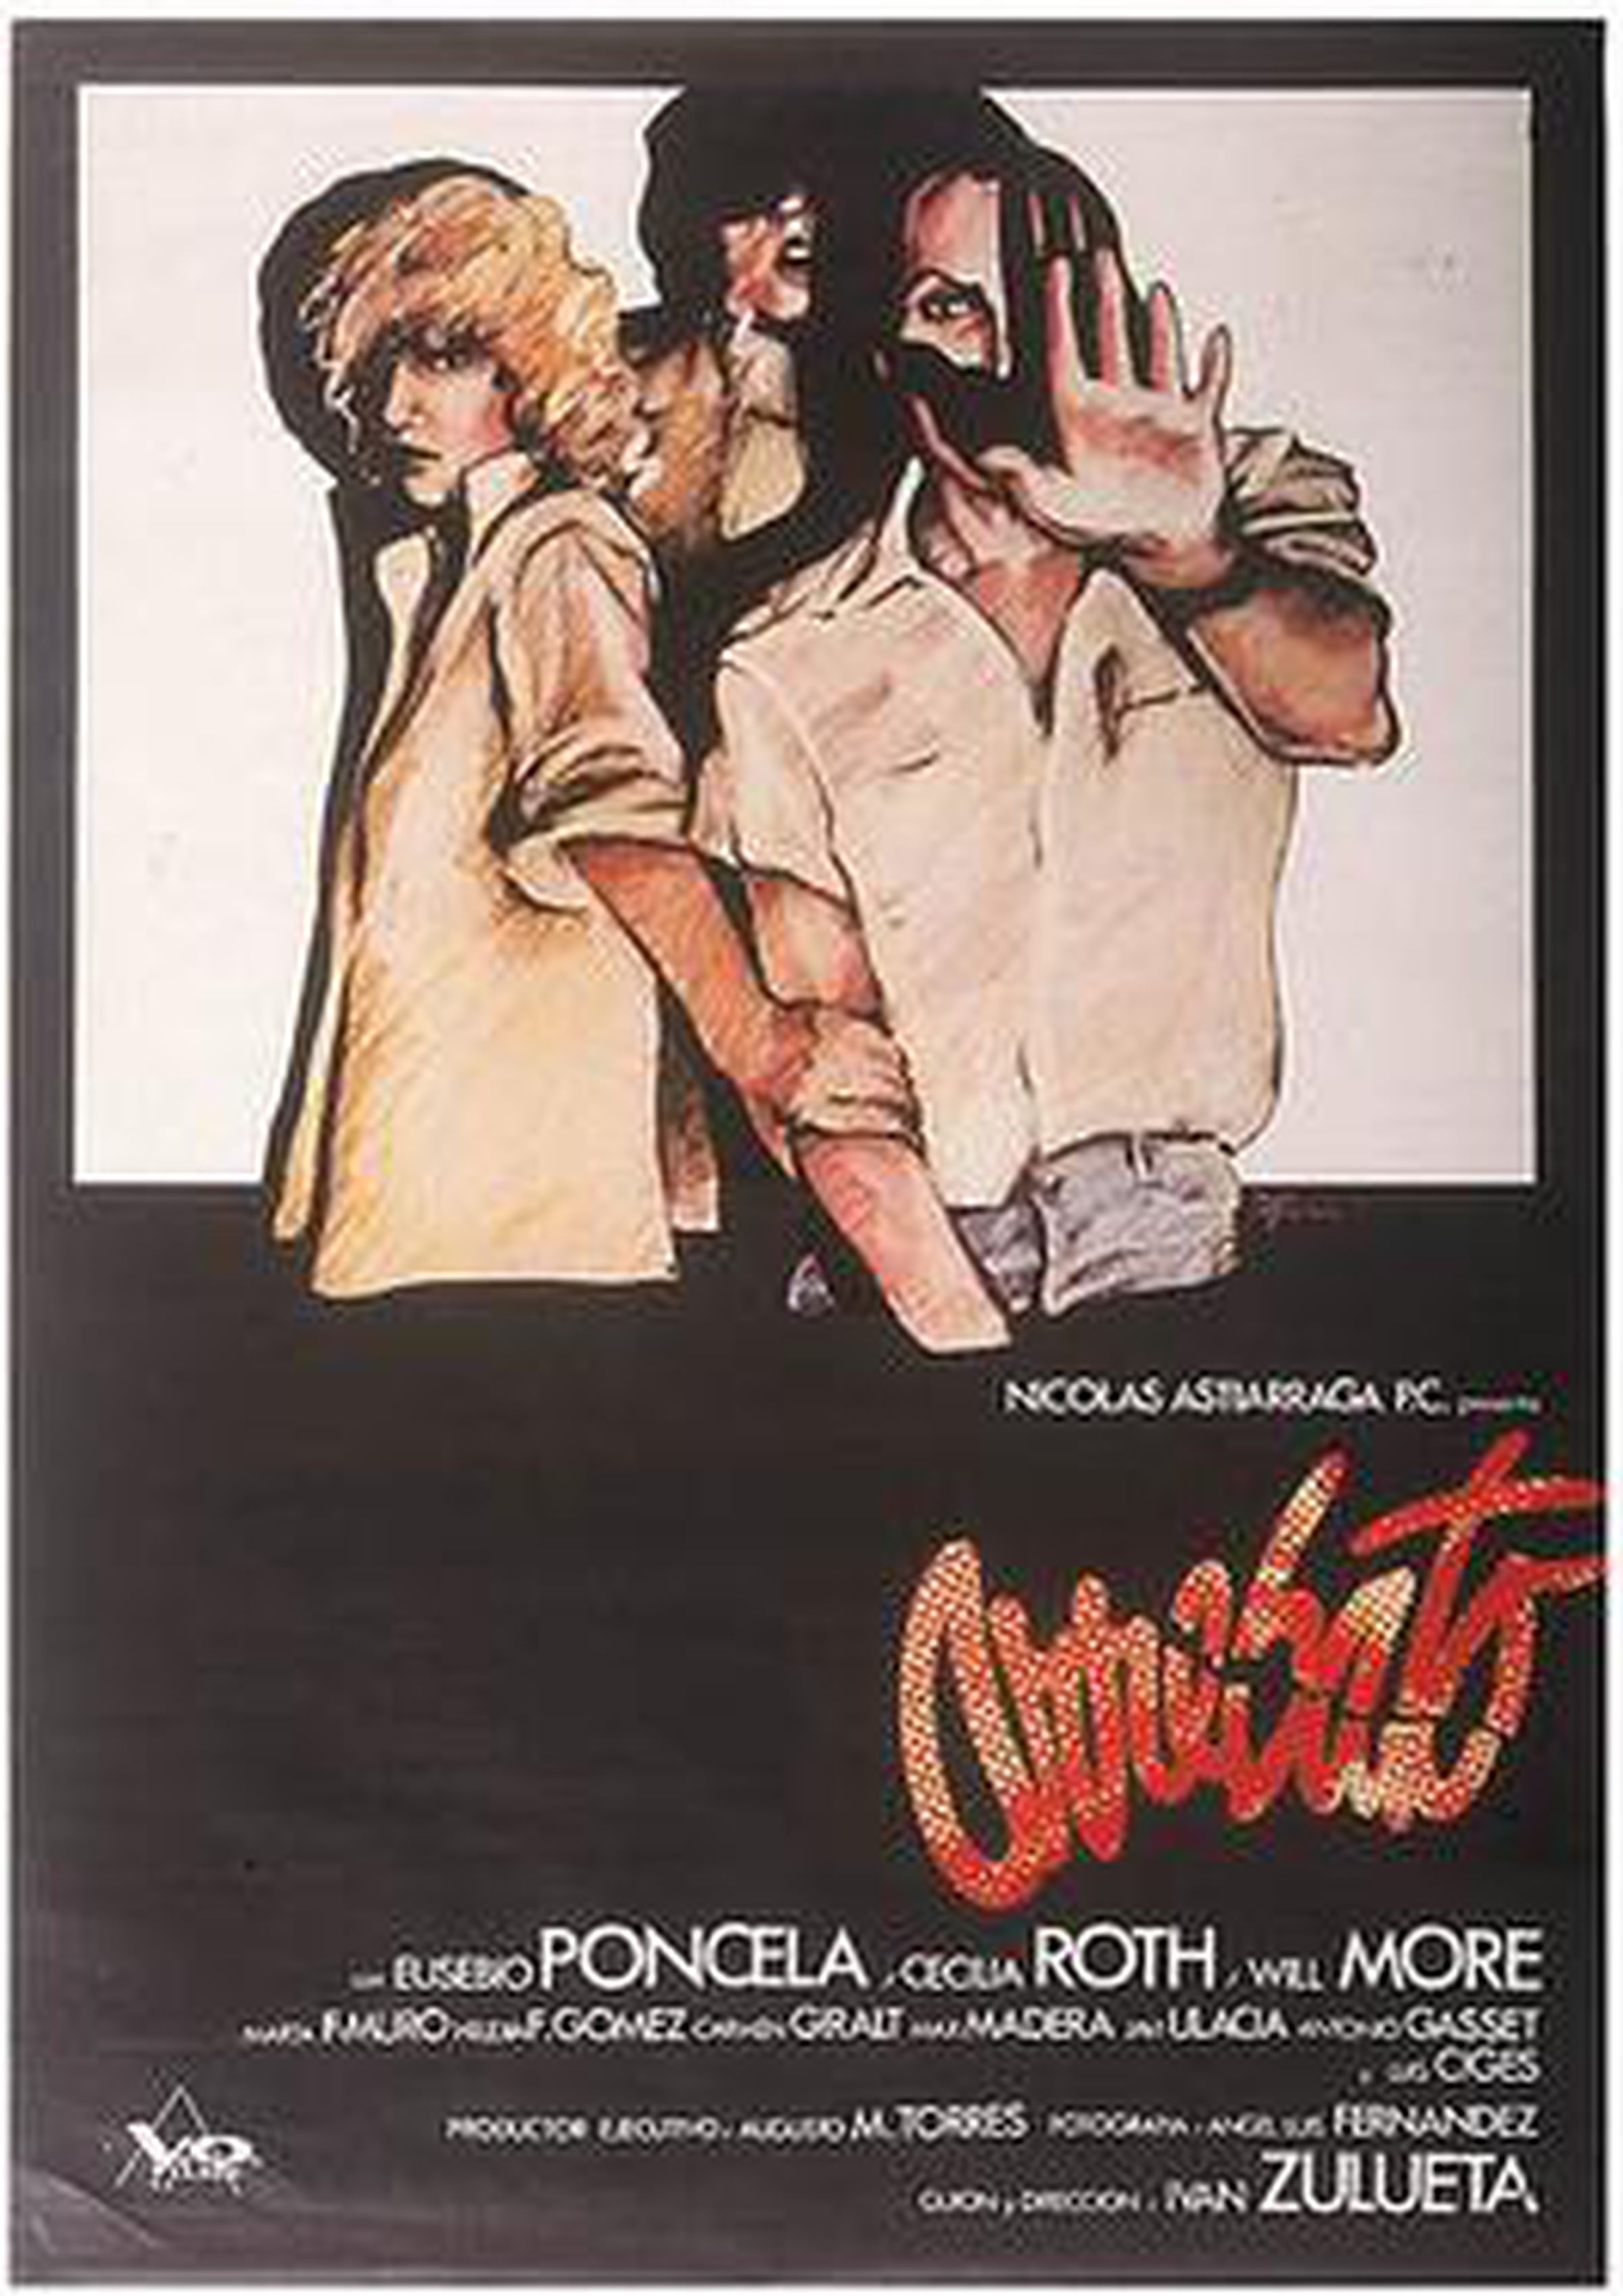 Poster for Arrebato showing man with his hand out, and two women